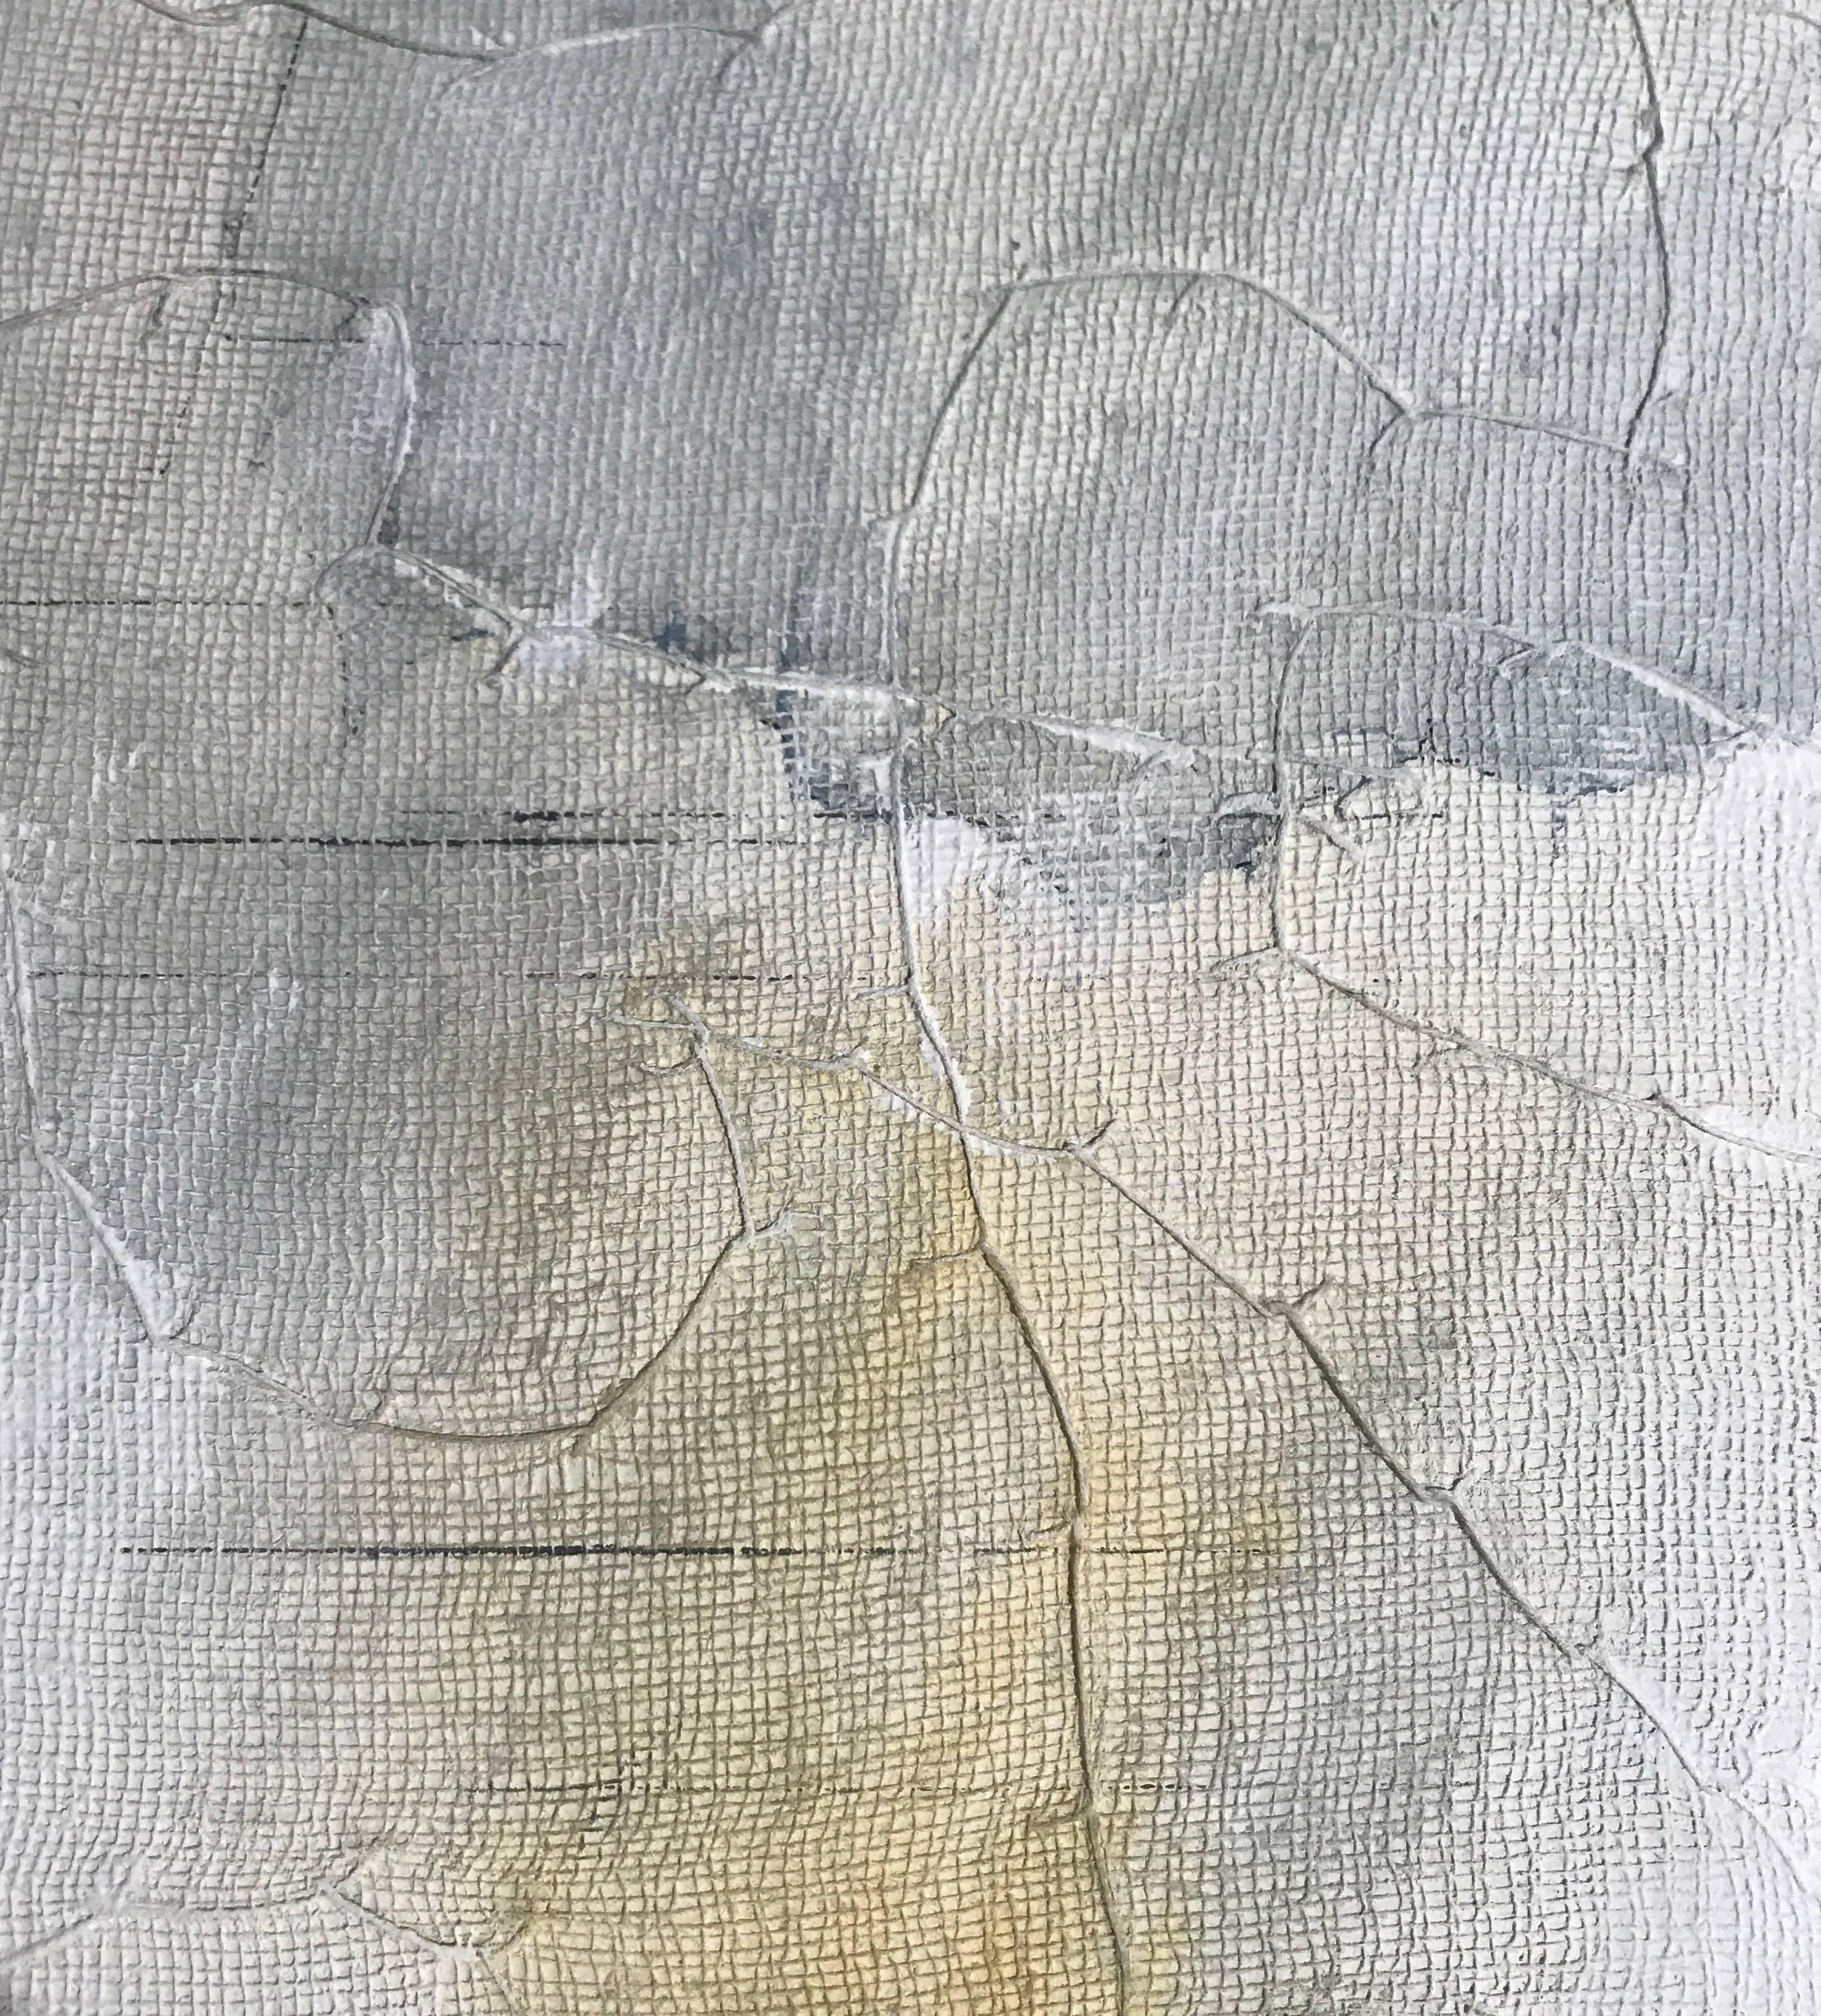 Contemporary abstract small painting by Belgian artist Diane Petry.
The painting is pale yellow, pale blue and grey.
The artist creates her own three layer canvas using pima cotton, gauze and Fine paper.
Raw edges and extra thread add